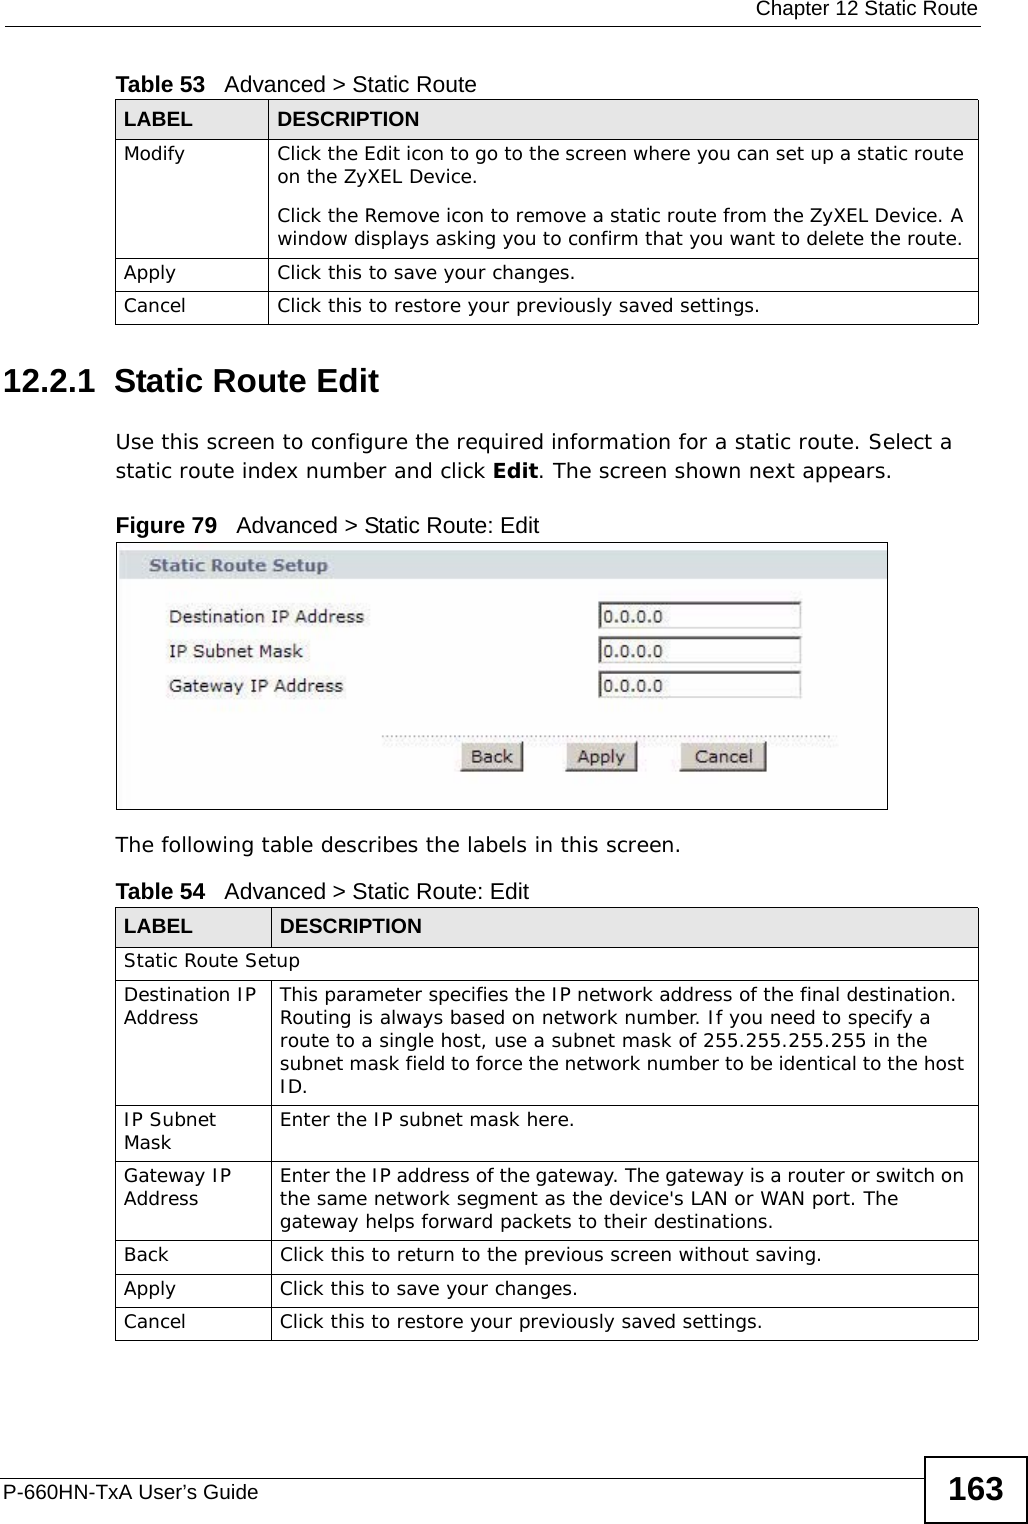  Chapter 12 Static RouteP-660HN-TxA User’s Guide 16312.2.1  Static Route Edit   Use this screen to configure the required information for a static route. Select a static route index number and click Edit. The screen shown next appears.Figure 79   Advanced &gt; Static Route: EditThe following table describes the labels in this screen. Modify Click the Edit icon to go to the screen where you can set up a static route on the ZyXEL Device.Click the Remove icon to remove a static route from the ZyXEL Device. A window displays asking you to confirm that you want to delete the route. Apply Click this to save your changes.Cancel Click this to restore your previously saved settings.Table 53   Advanced &gt; Static RouteLABEL DESCRIPTIONTable 54   Advanced &gt; Static Route: EditLABEL DESCRIPTIONStatic Route SetupDestination IP Address This parameter specifies the IP network address of the final destination.  Routing is always based on network number. If you need to specify a route to a single host, use a subnet mask of 255.255.255.255 in the subnet mask field to force the network number to be identical to the host ID.IP Subnet Mask  Enter the IP subnet mask here.Gateway IP Address Enter the IP address of the gateway. The gateway is a router or switch on the same network segment as the device&apos;s LAN or WAN port. The gateway helps forward packets to their destinations.Back Click this to return to the previous screen without saving.Apply Click this to save your changes.Cancel Click this to restore your previously saved settings.